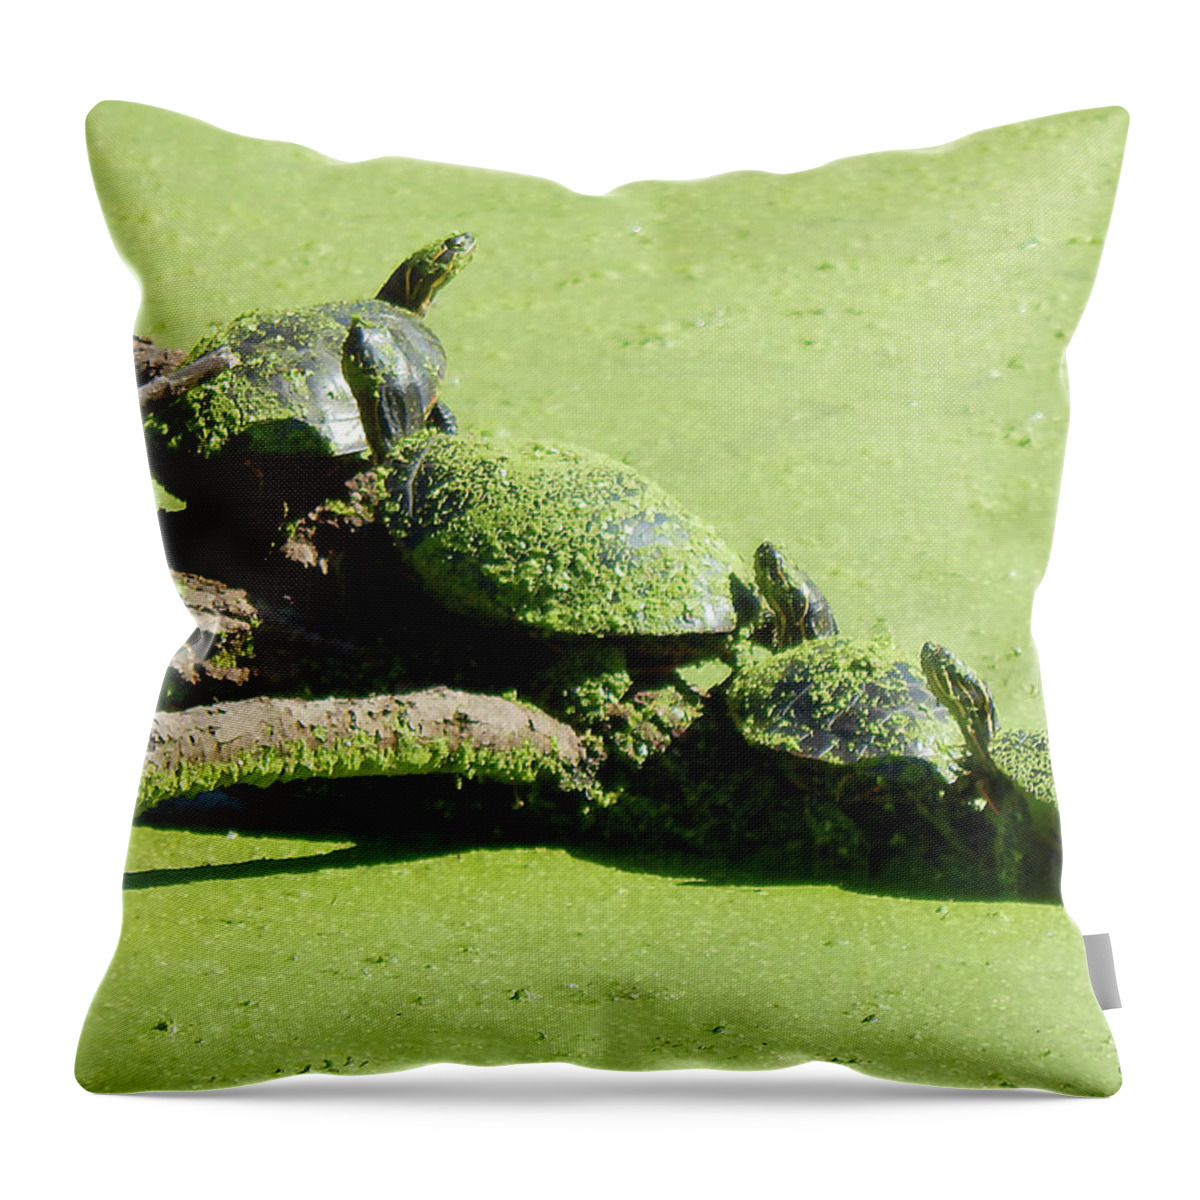 Painted Turtle Throw Pillow featuring the photograph Chain Sunning by Wild Thing